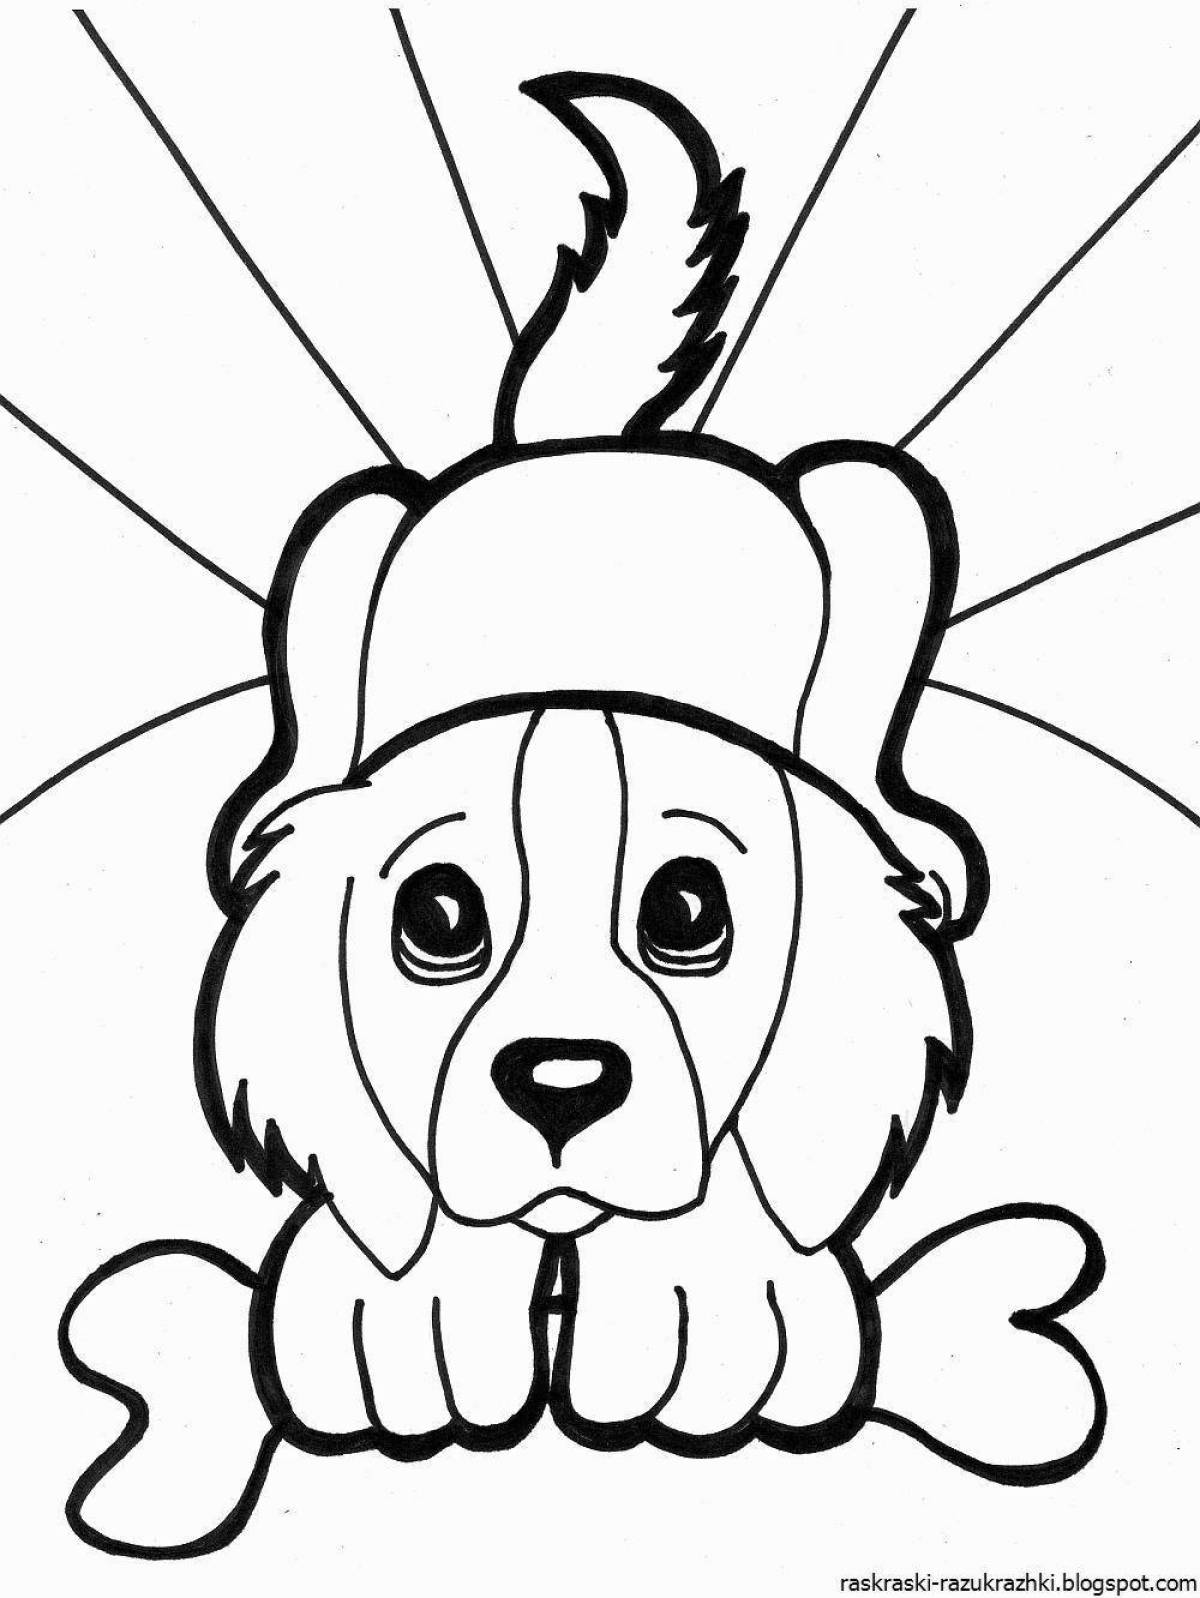 Fluffy dog ​​coloring book